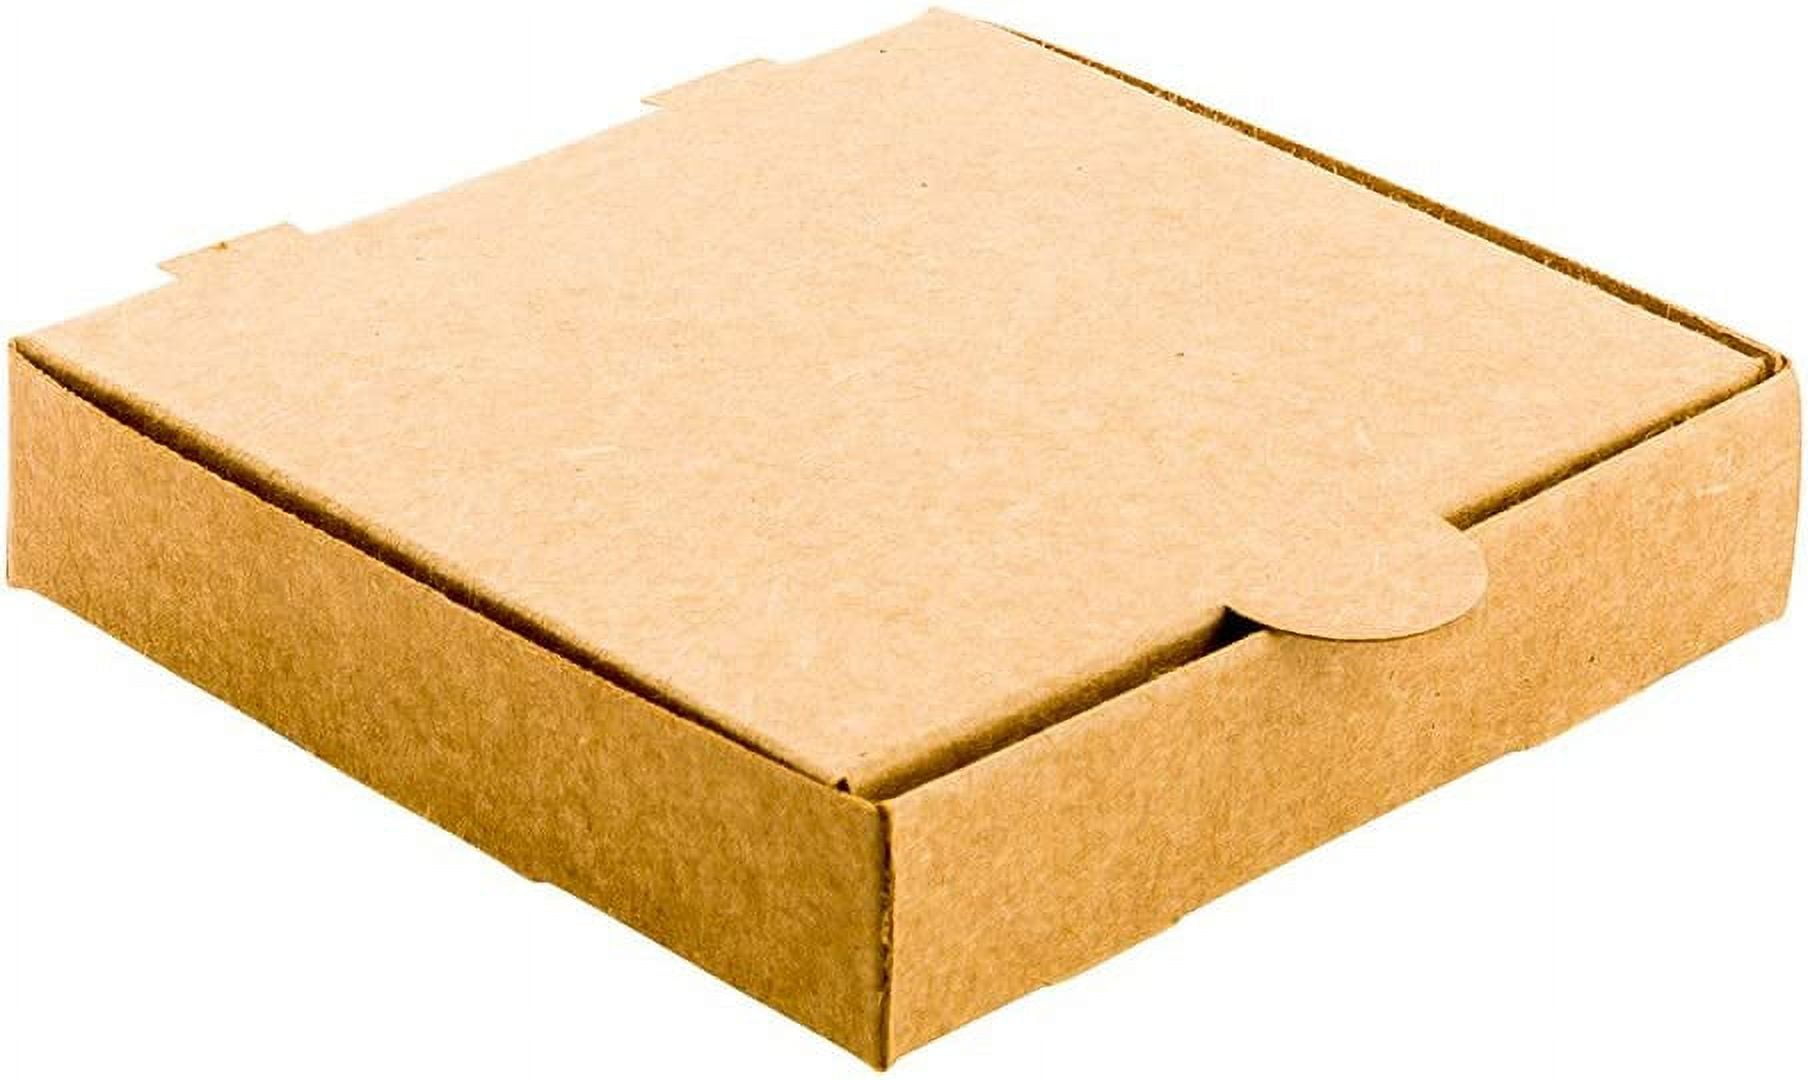 Restaurantware 3.5 x 3.5 x 0.8 inch Pizza Boxes, 100 Disposable Small Pizza Boxes - Durable, Locks in Pizzas, Cookies, or Party Favors, Kraft Paper